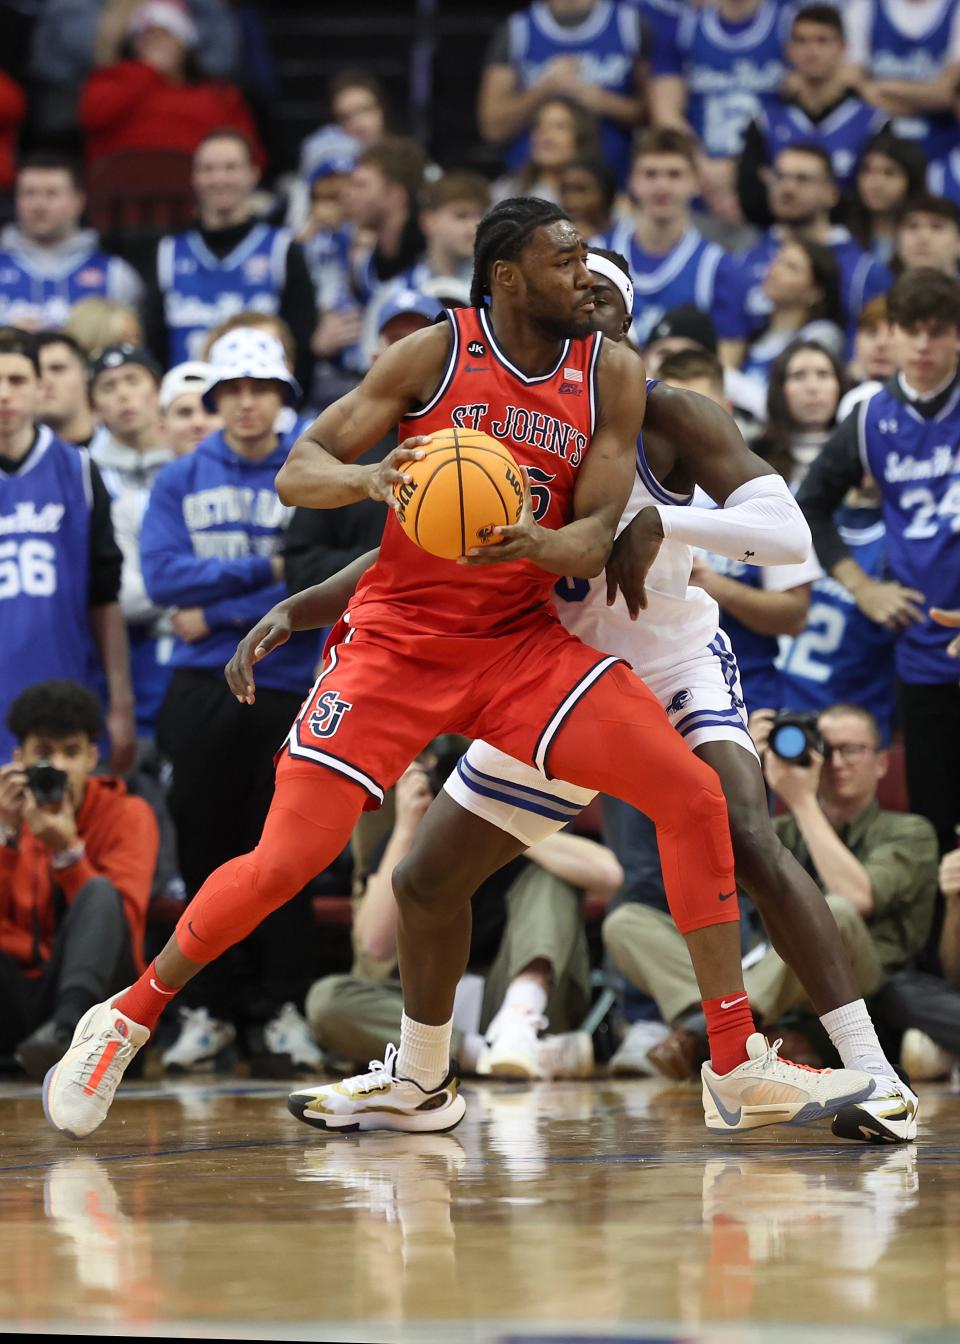 St. John's forward Drissa Traore (55) drives to the basket against a Seton Hall player during a game last season. On Monday, Traore committed to URI.